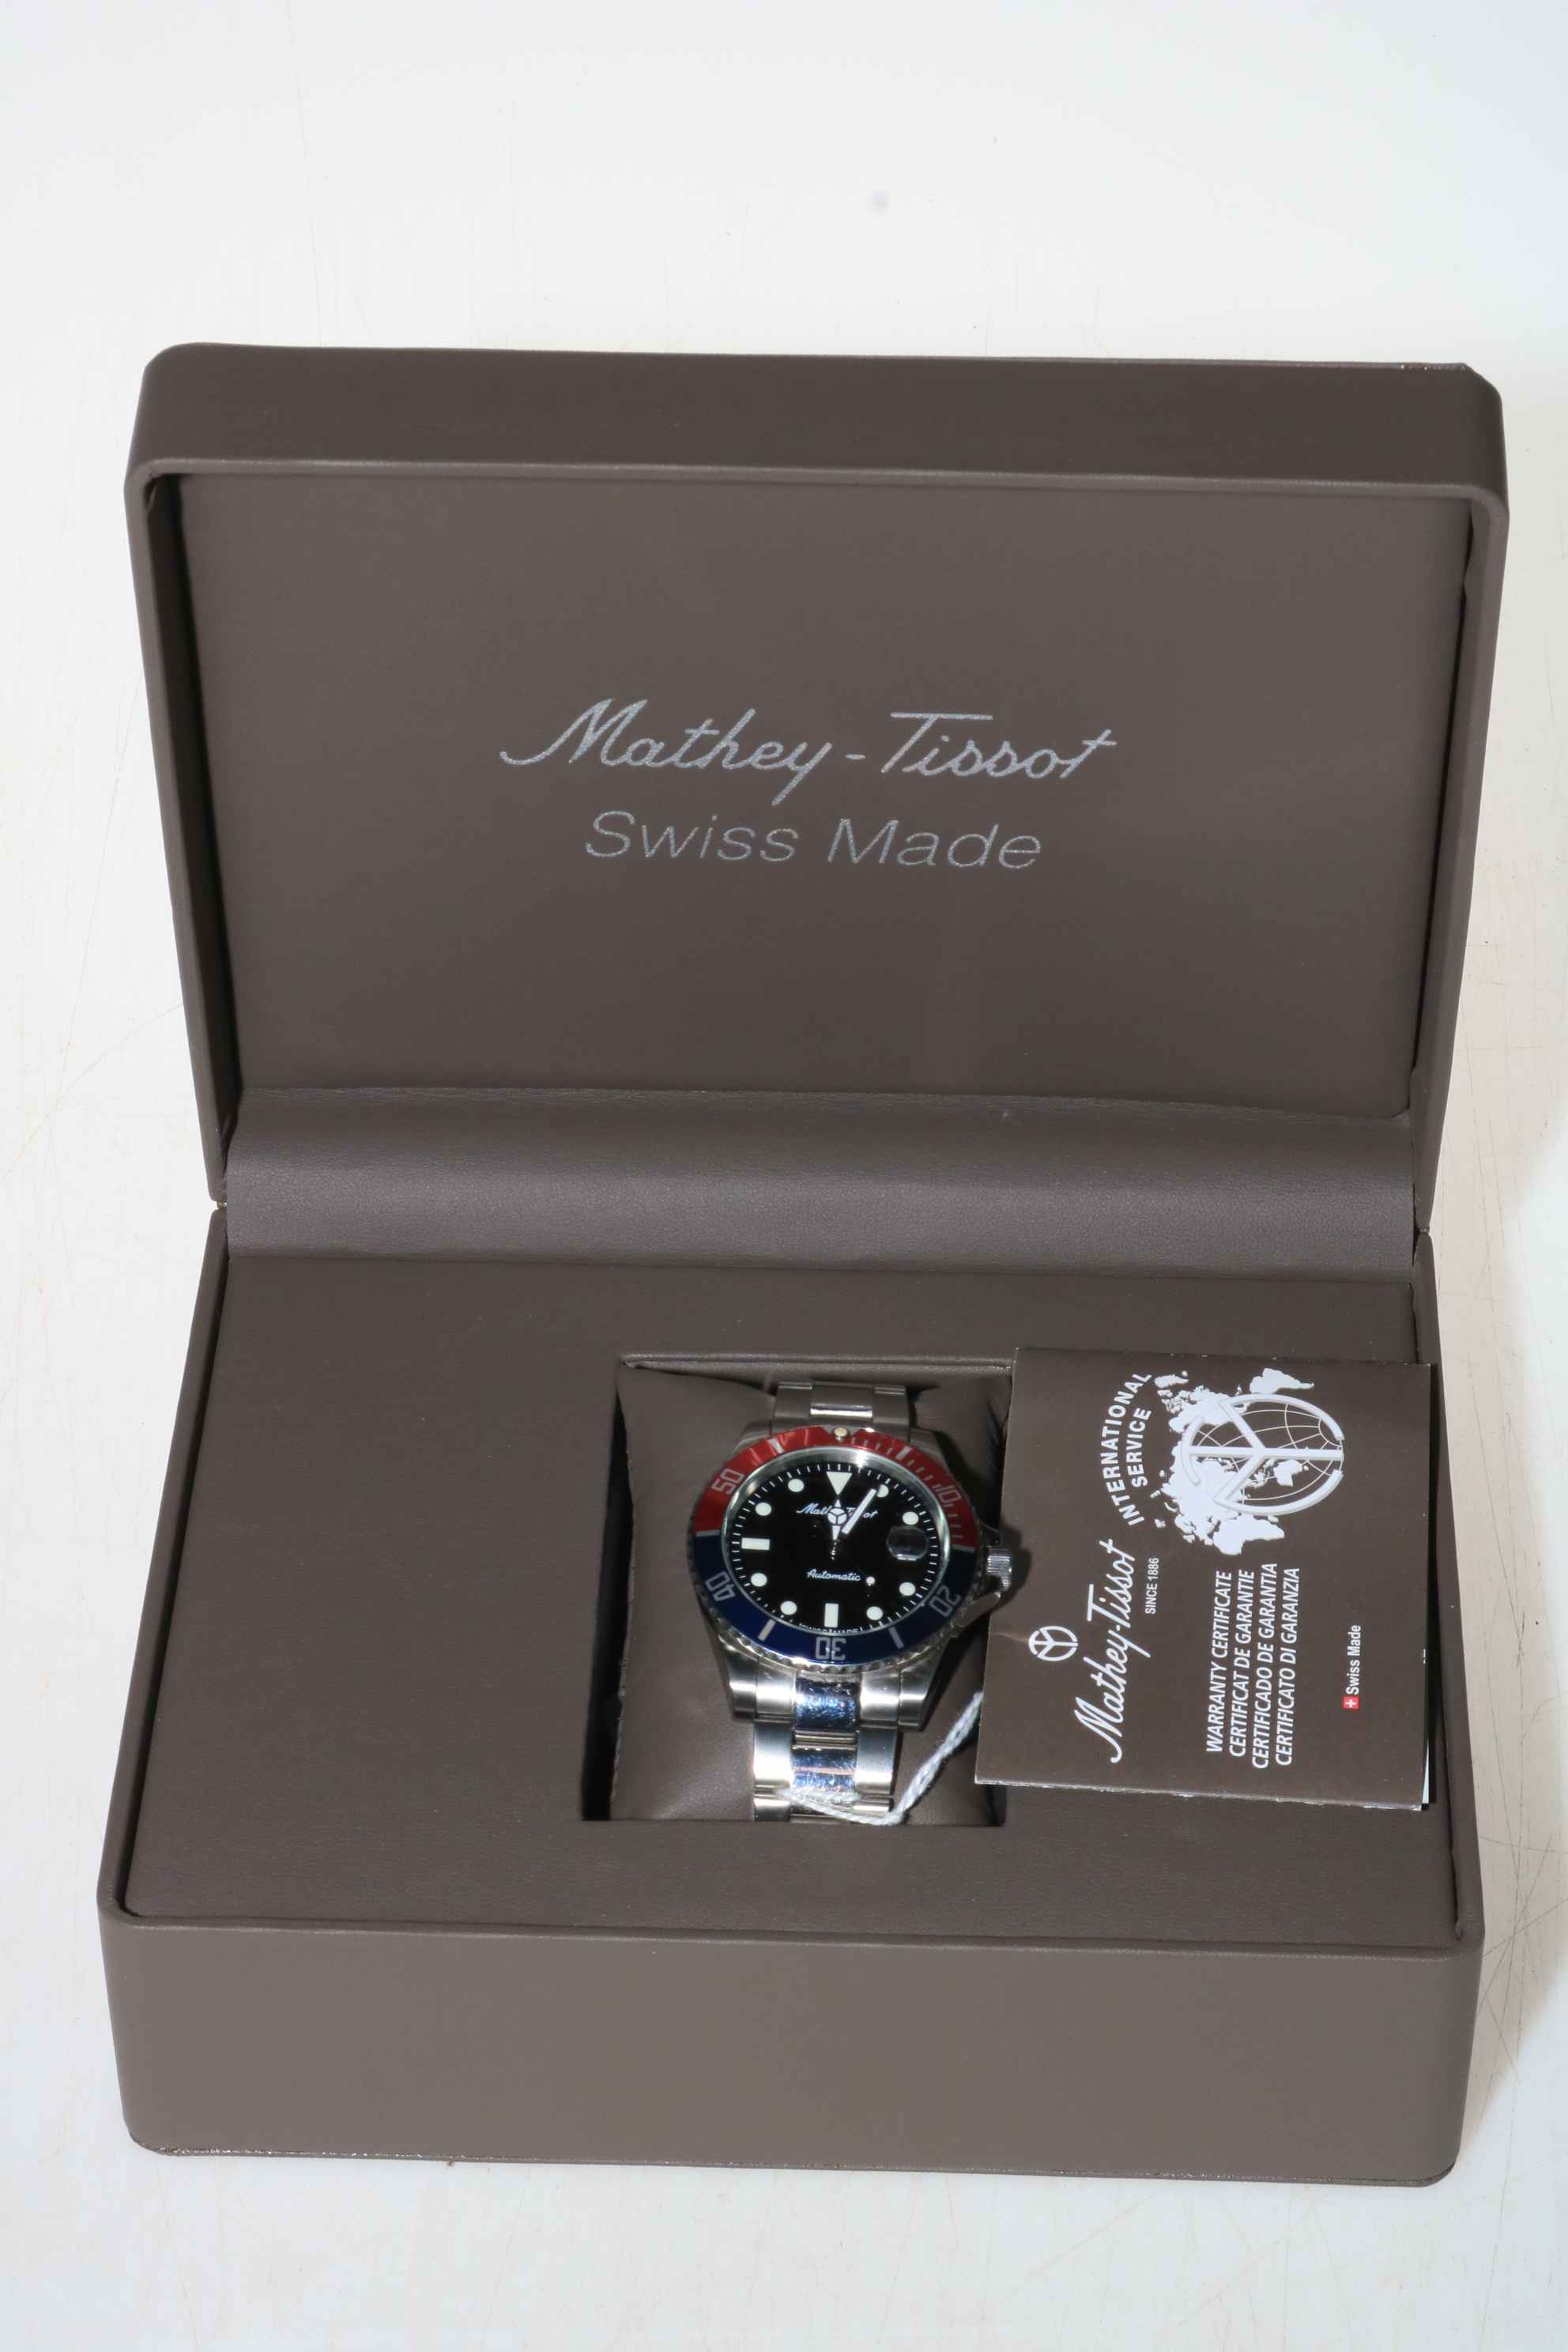 Mathey Tissot automatic wrist watch, in box with paperwork.